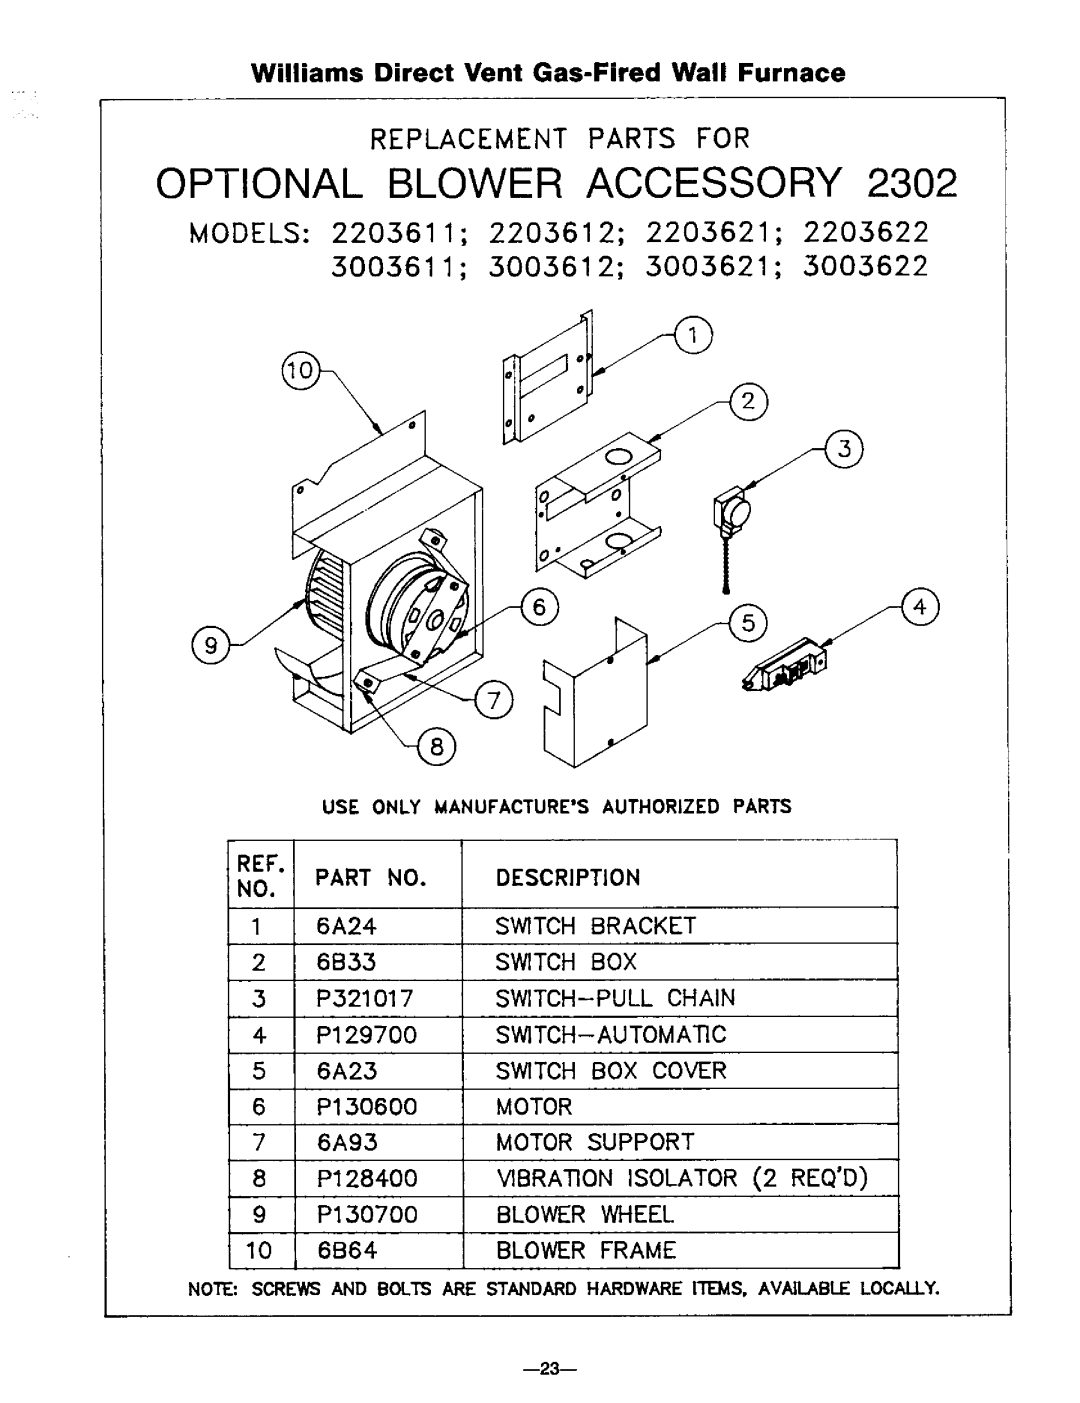 Williams 1403612 Optional Blower Accessory, Replacement Parts For, Models, Williams Direct Vent Gas-FiredWail Furnace 